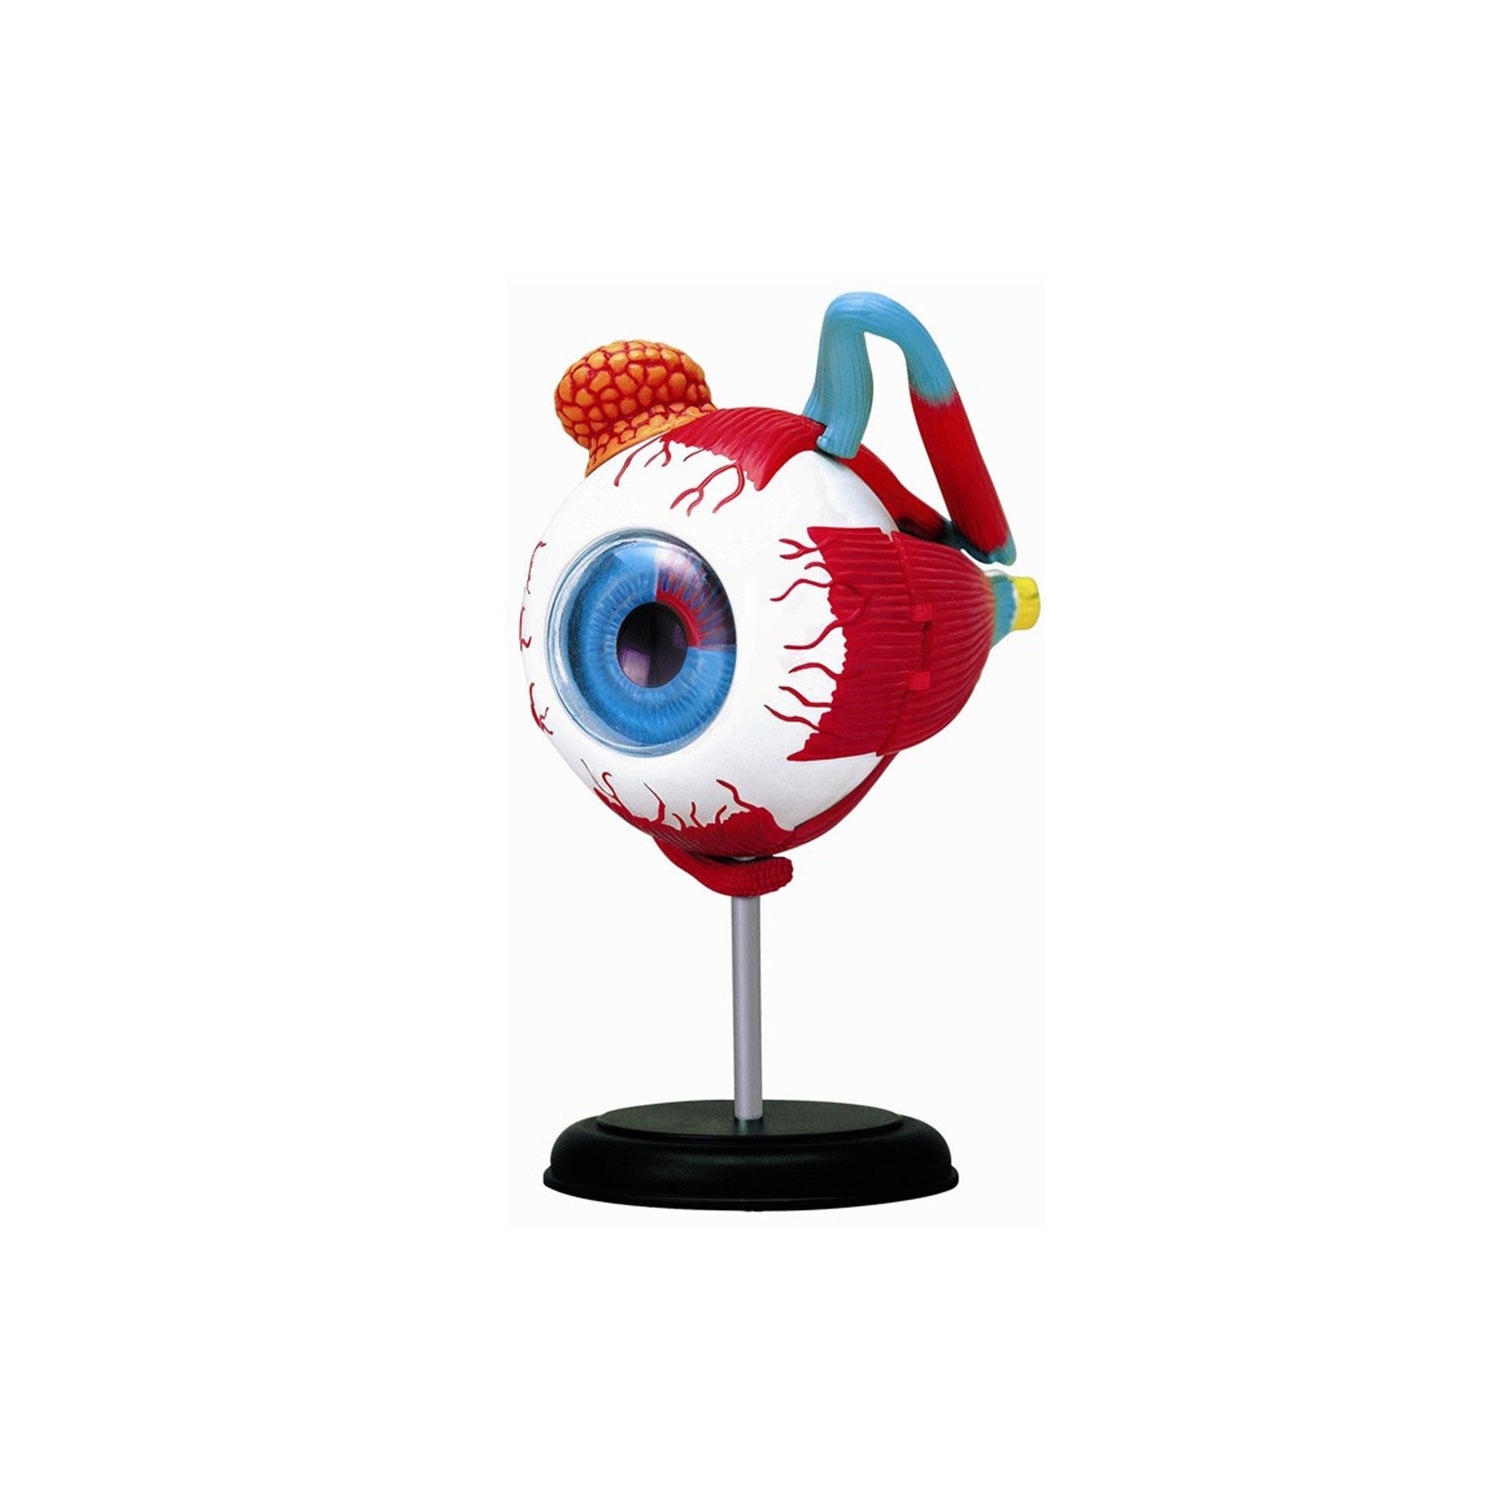 Eye Model with Muscles